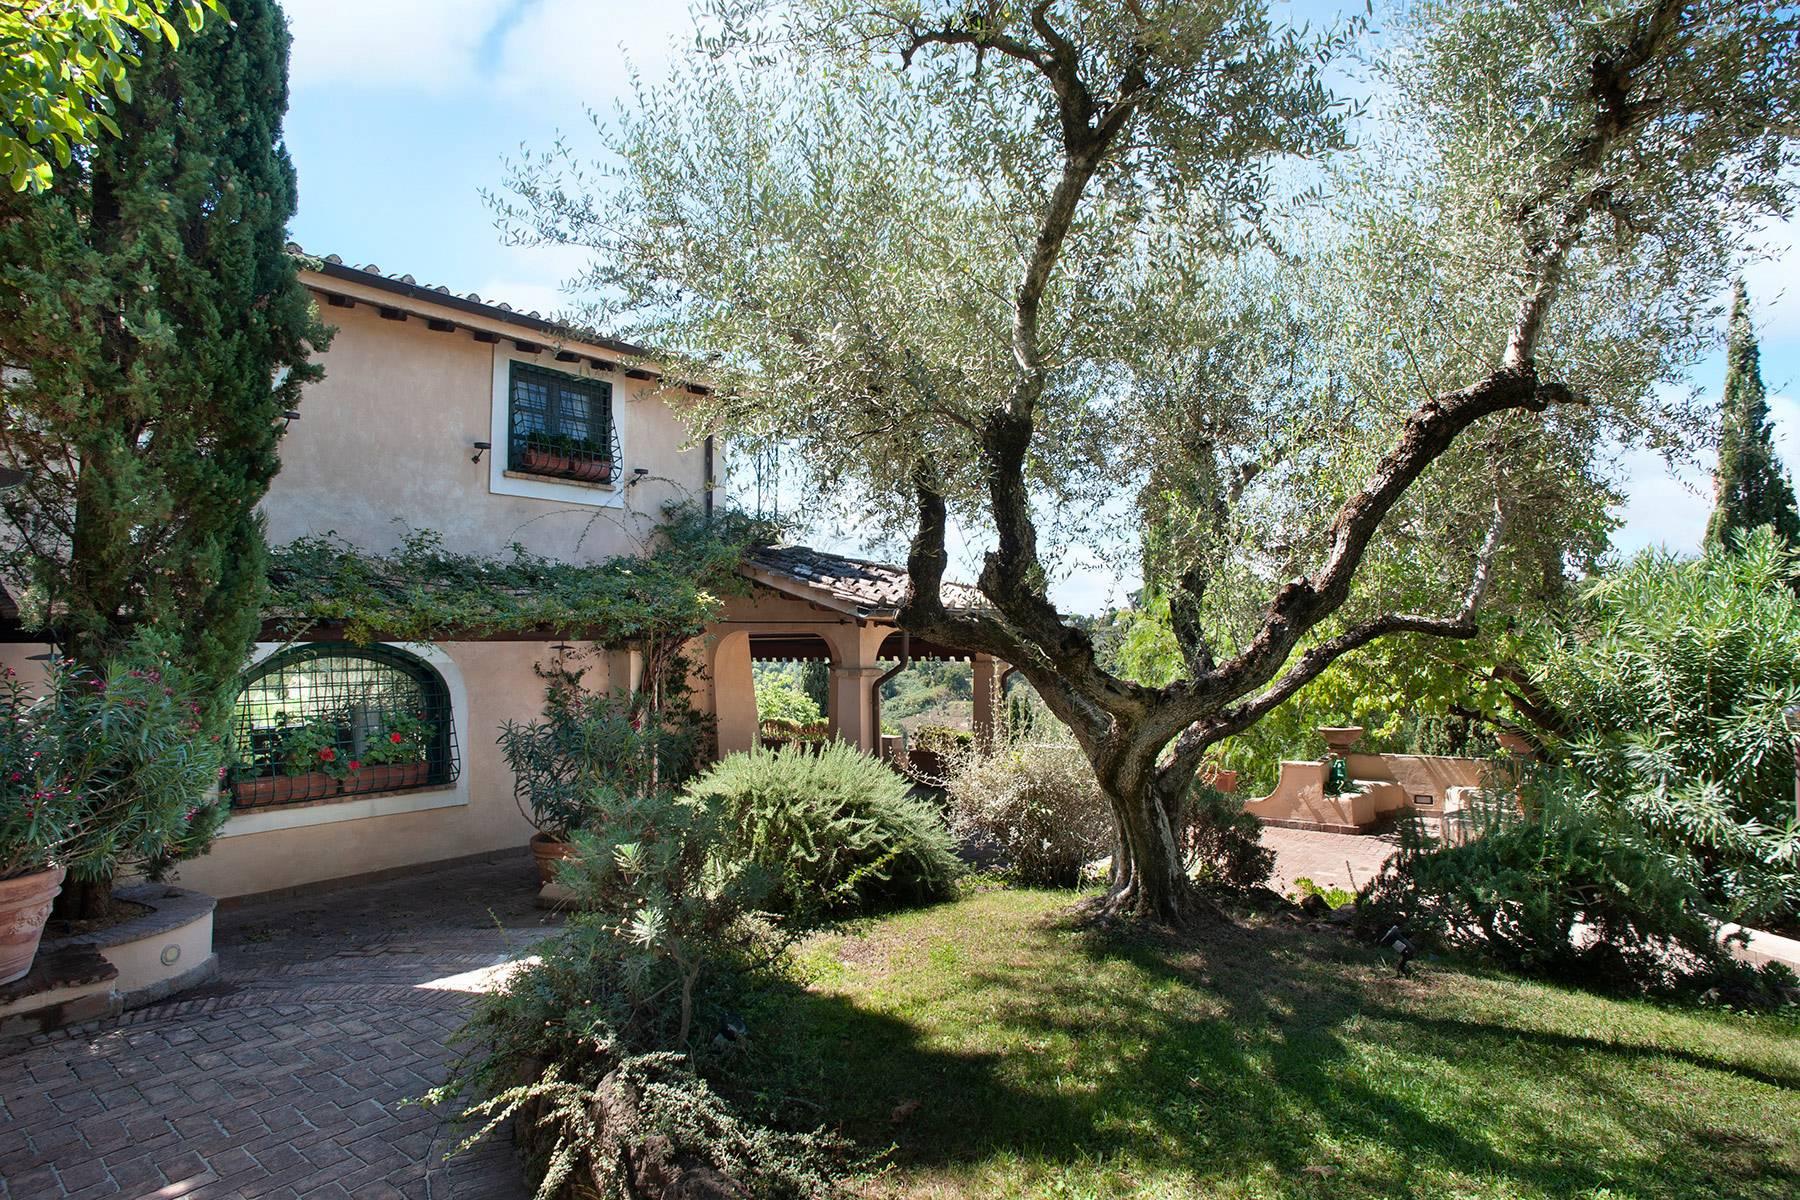 Villa Nayara - Lovely mansion with swimming pool 30 minutes from Rome - 49